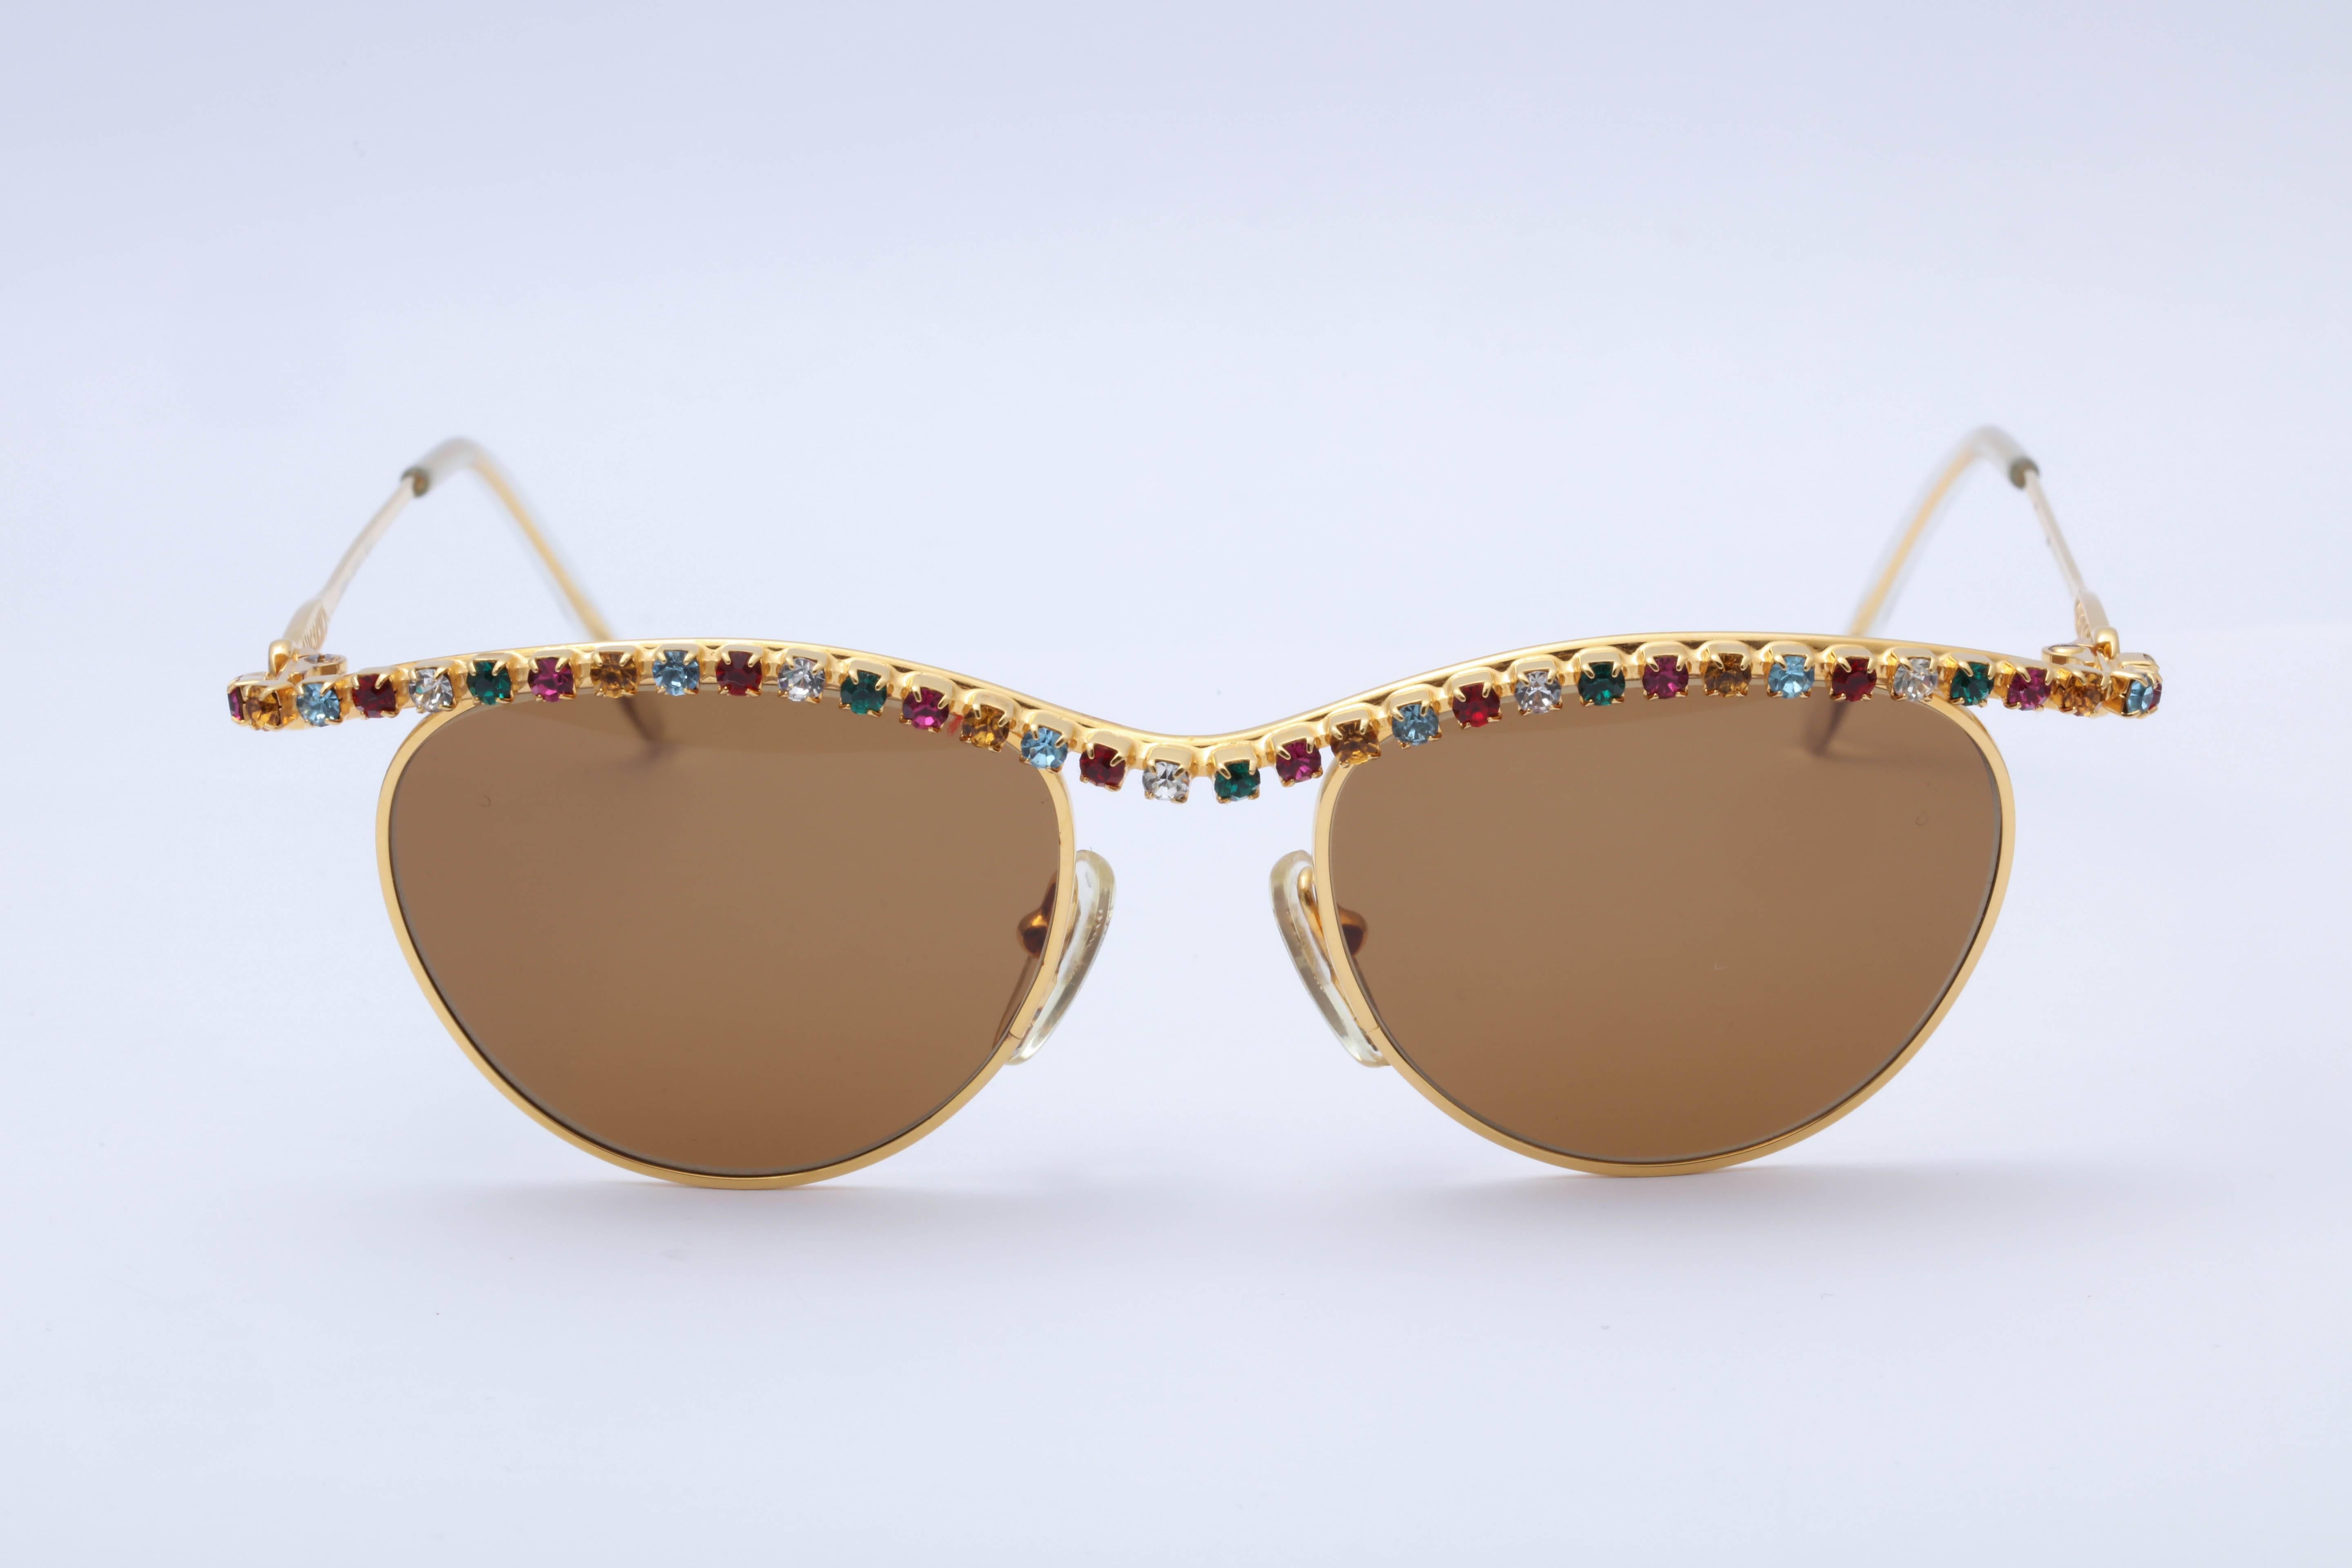 Vintage Moschino By Persol MM843 Sunglasses In Excellent Condition For Sale In Chicago, IL